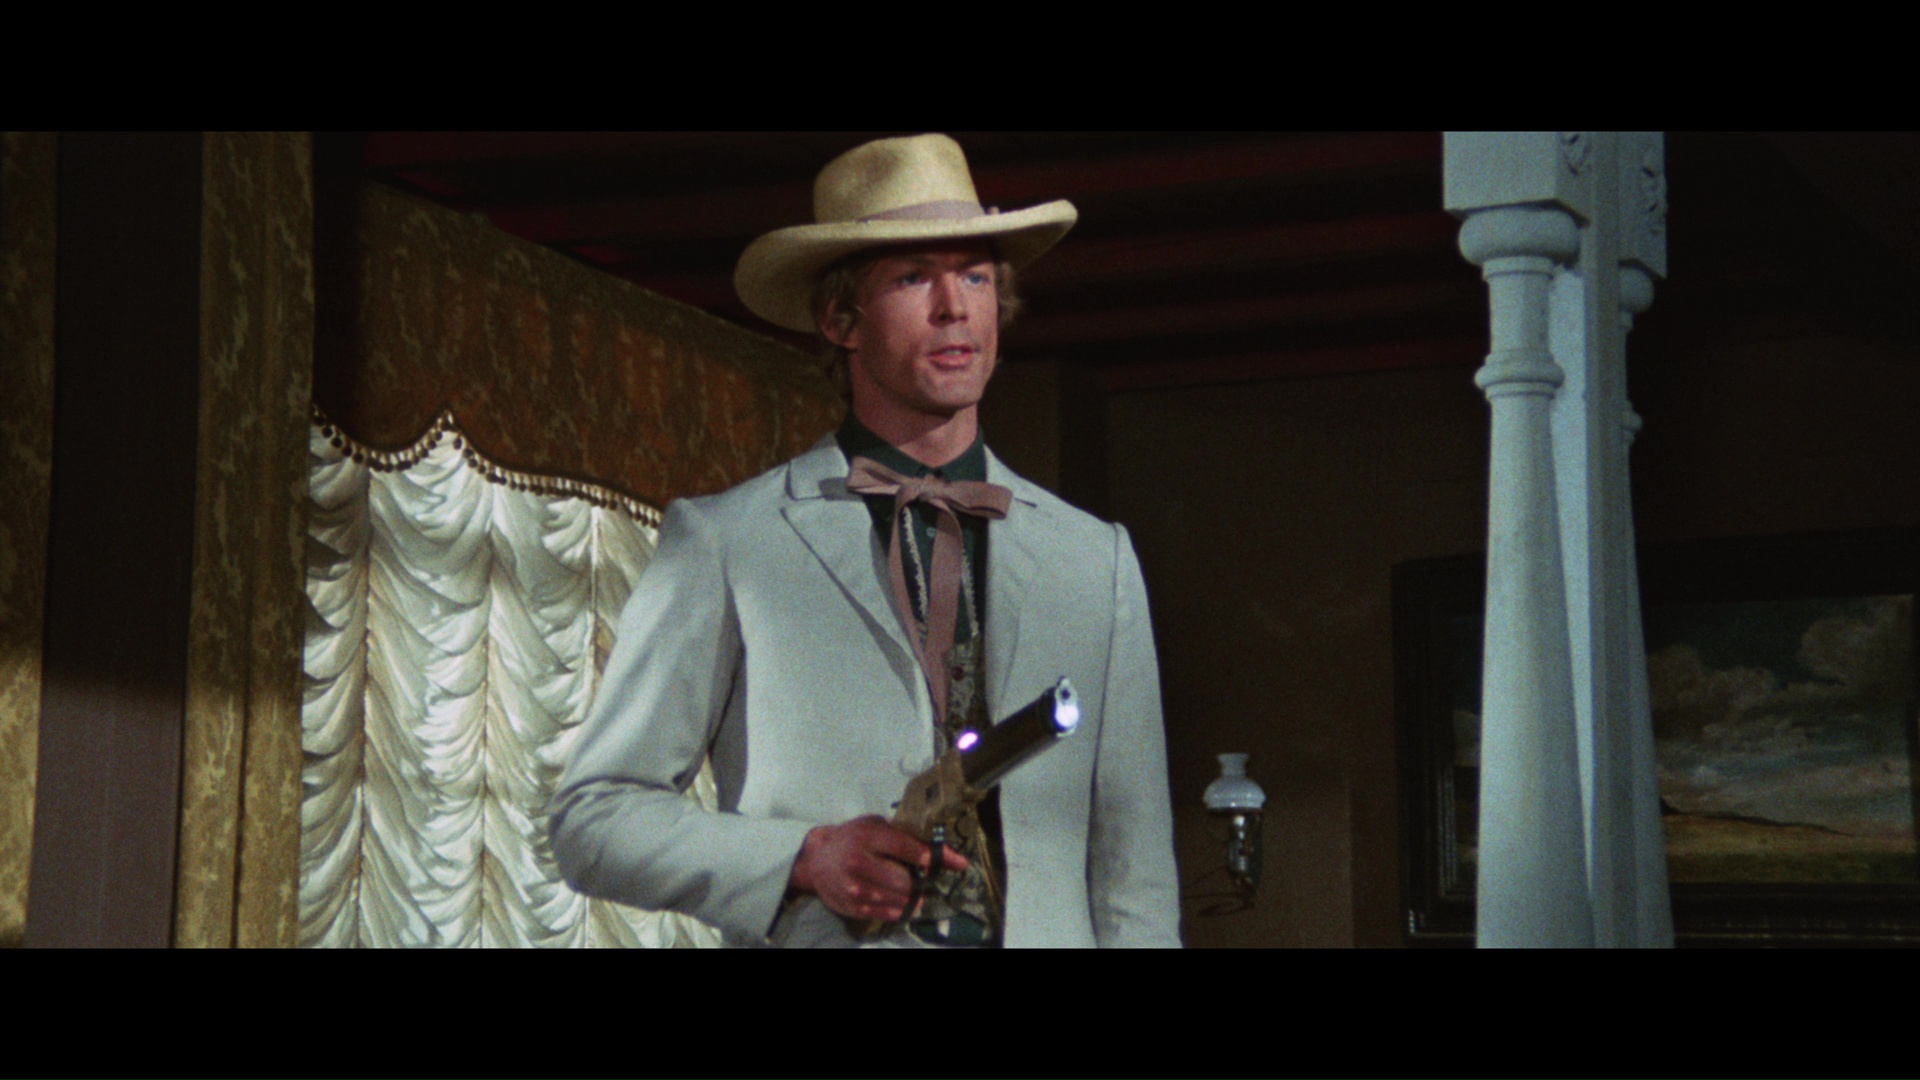 SARTANA'S HERE... TRADE YOUR PISTOL FOR A COFFIN